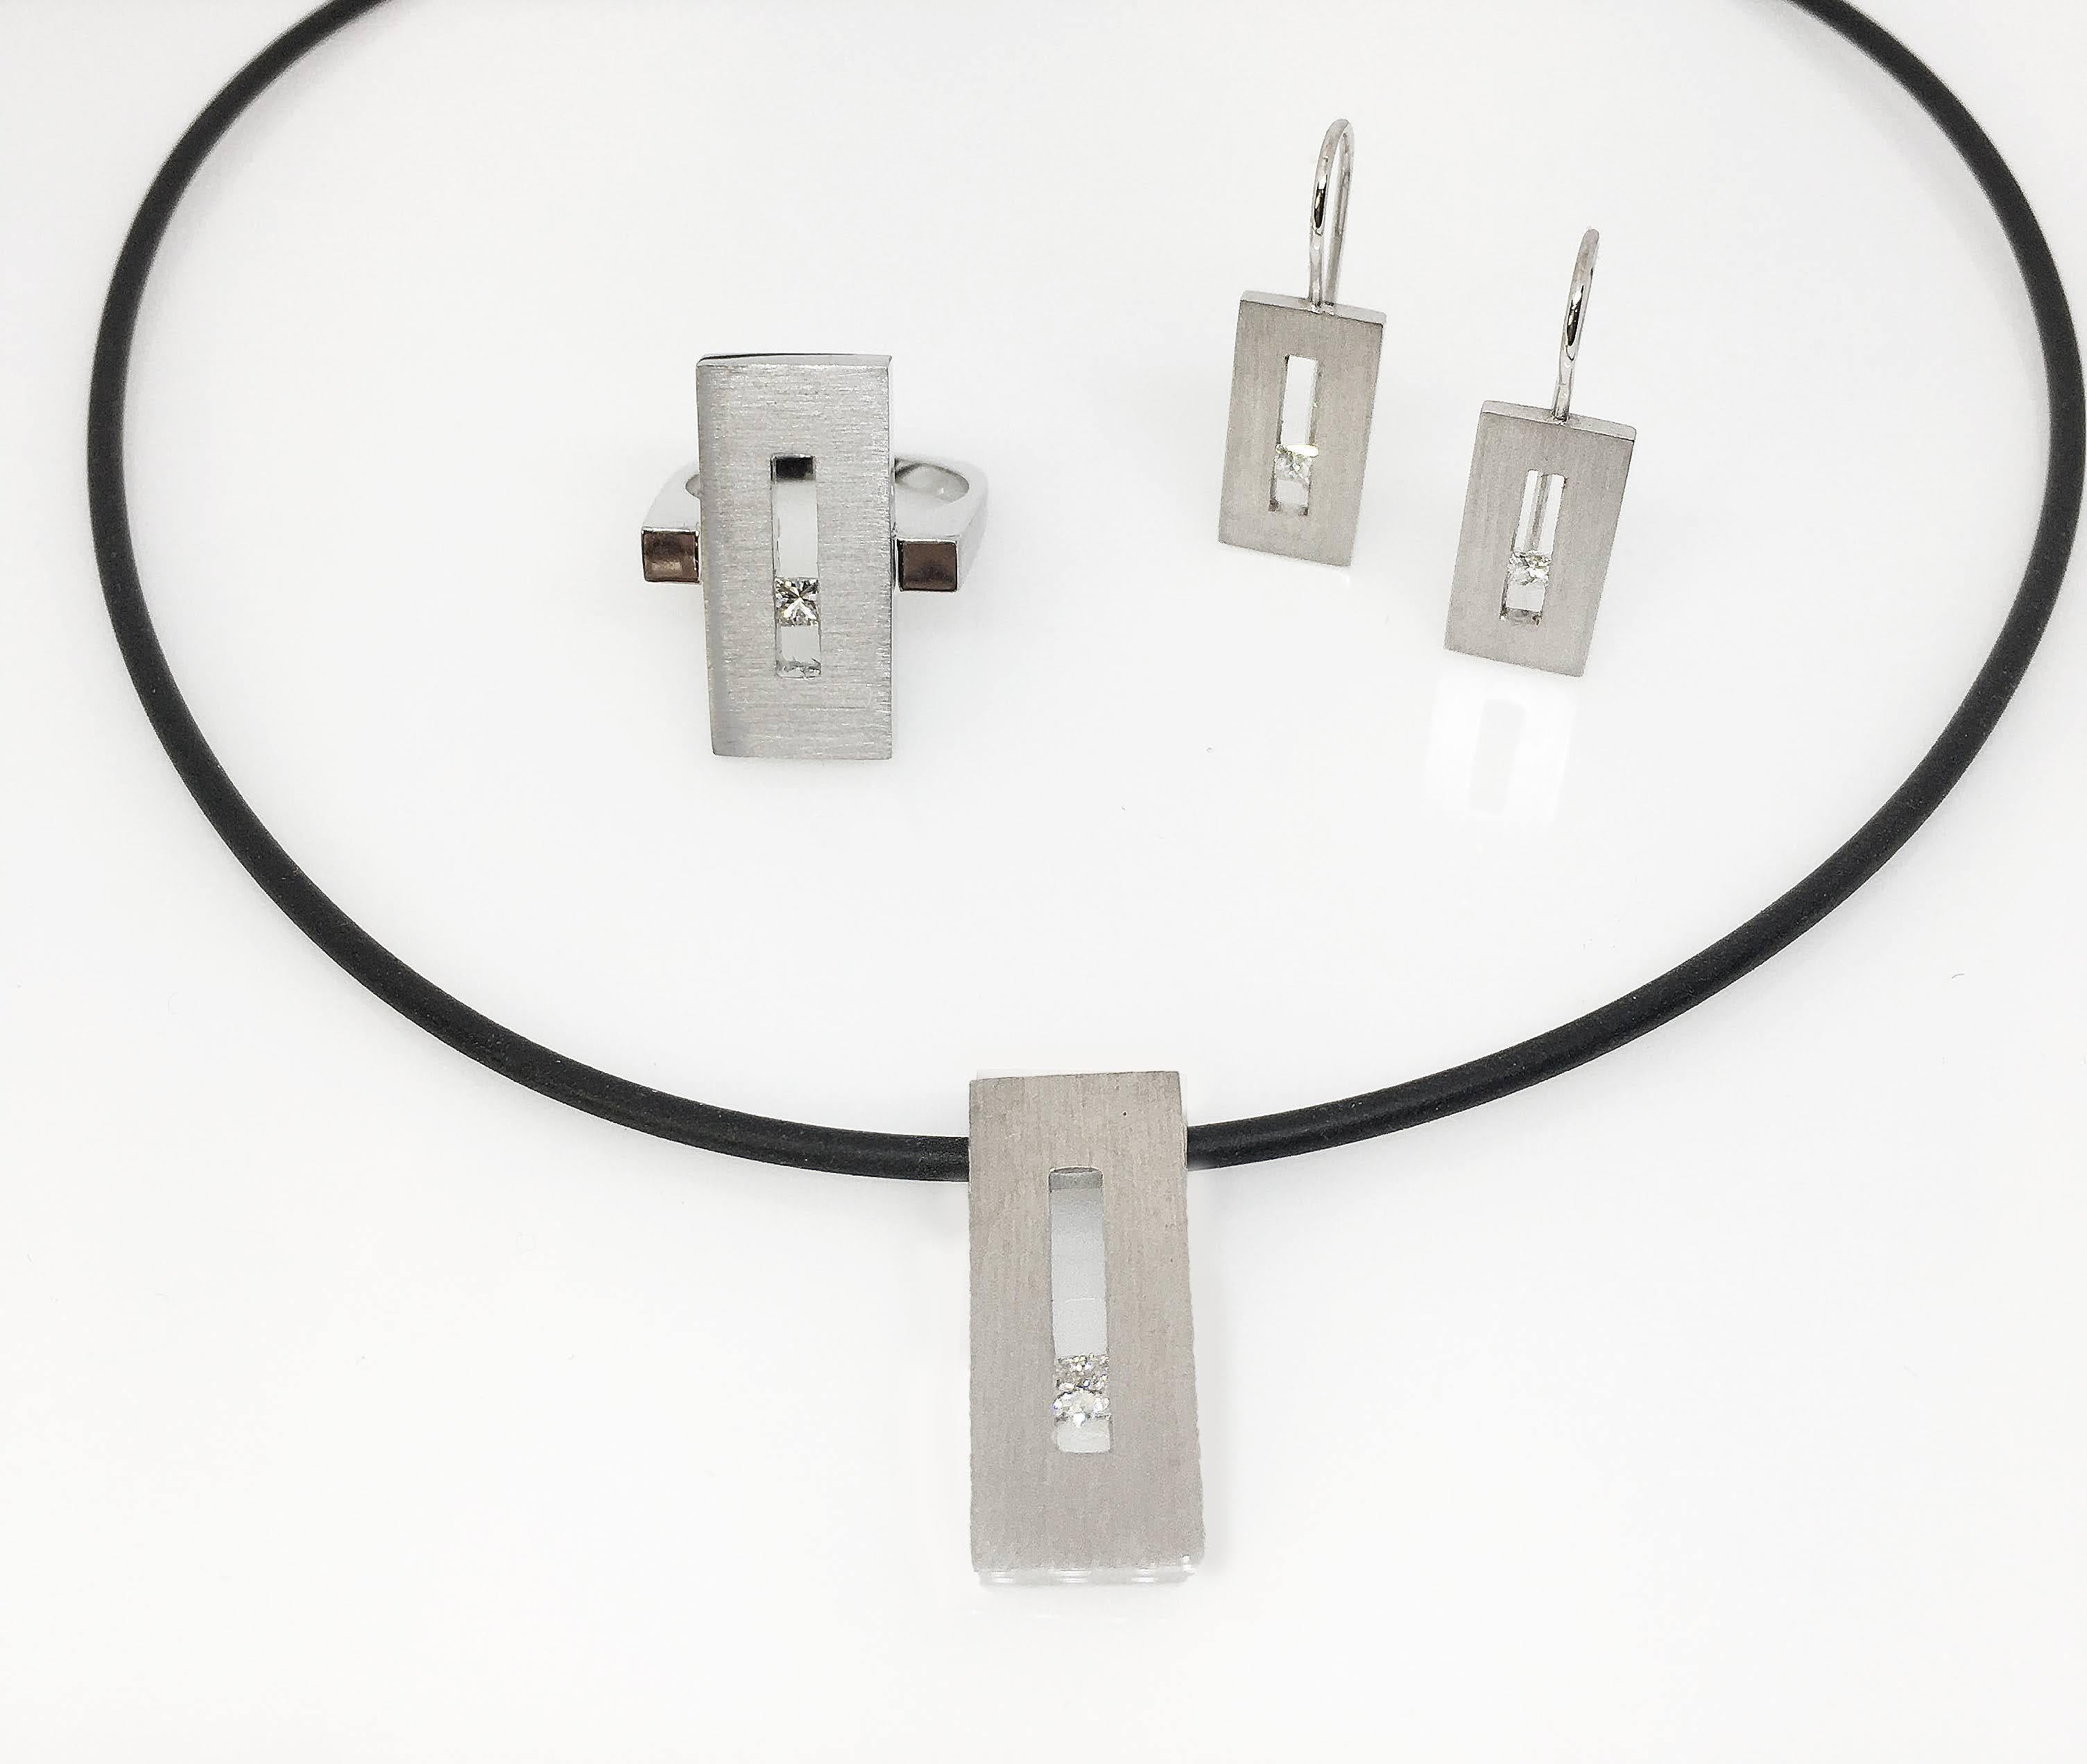 This Princess Diamond in White Gold Rectangle Pendant on Rubber Cord is part of our Suspension Collection. Modern and architecturally inspired, this rectangle pendant is shown in white gold with a brushed finish and set off center with an